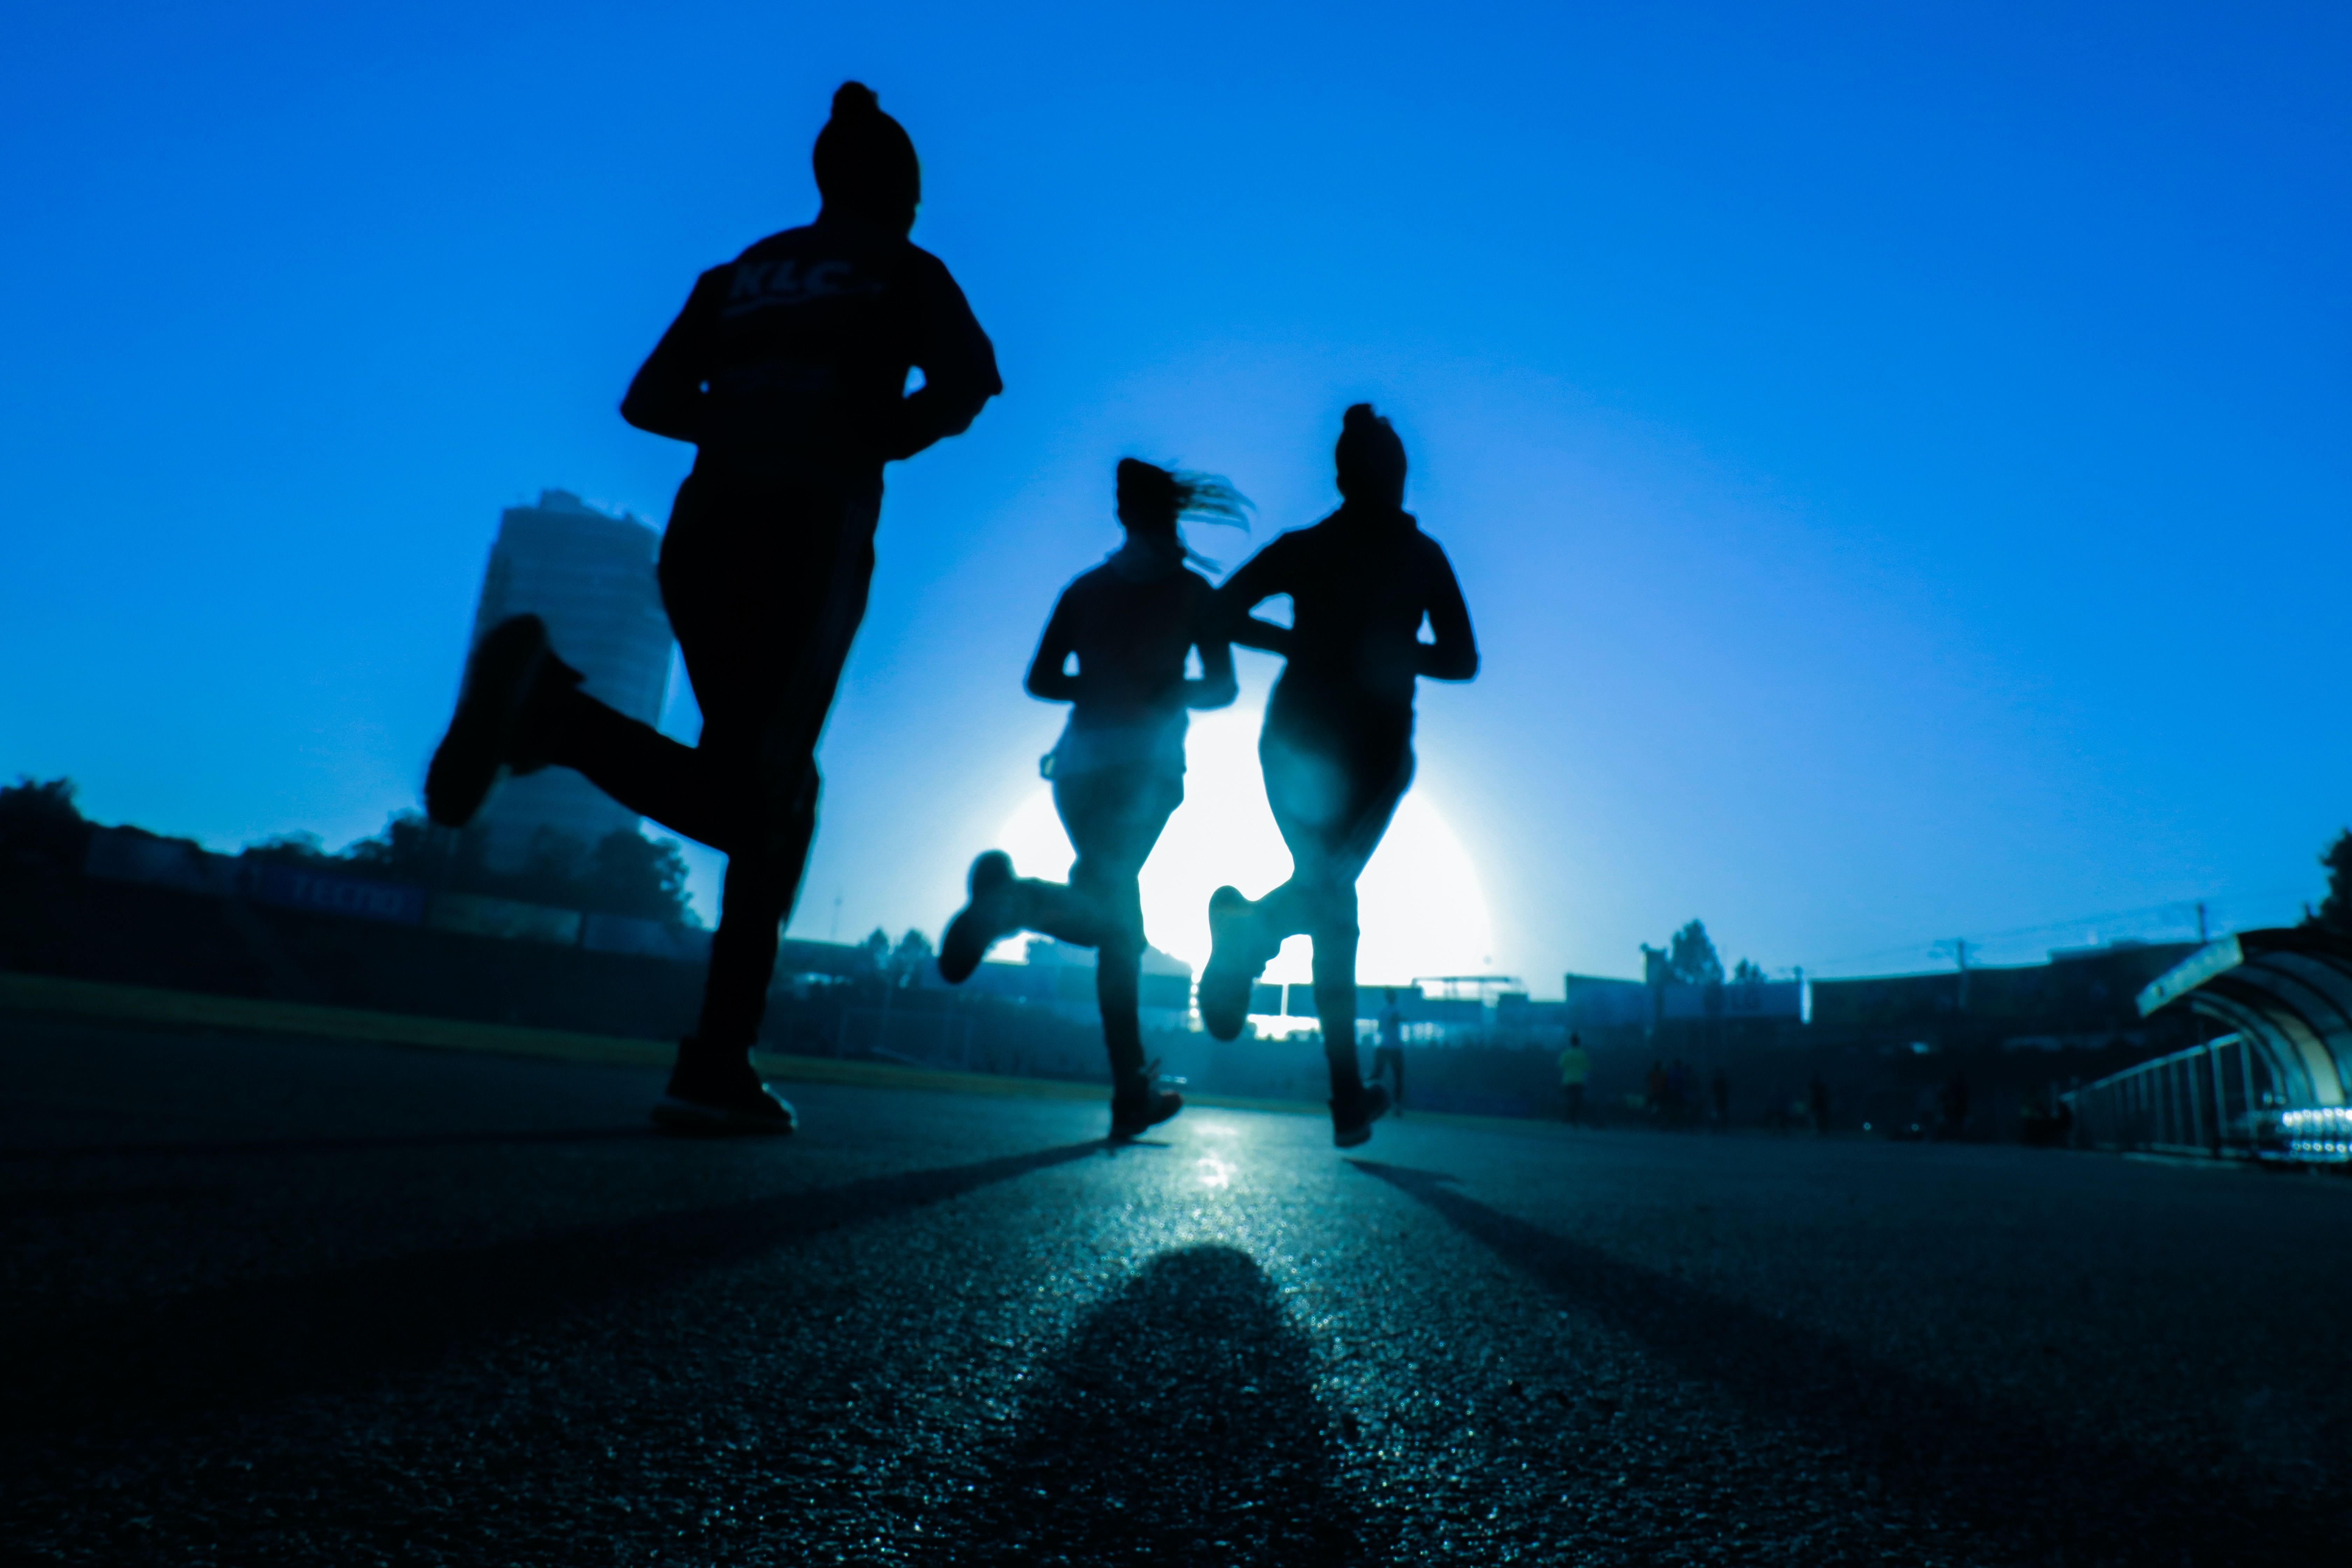 Image of three people running in the moonlight